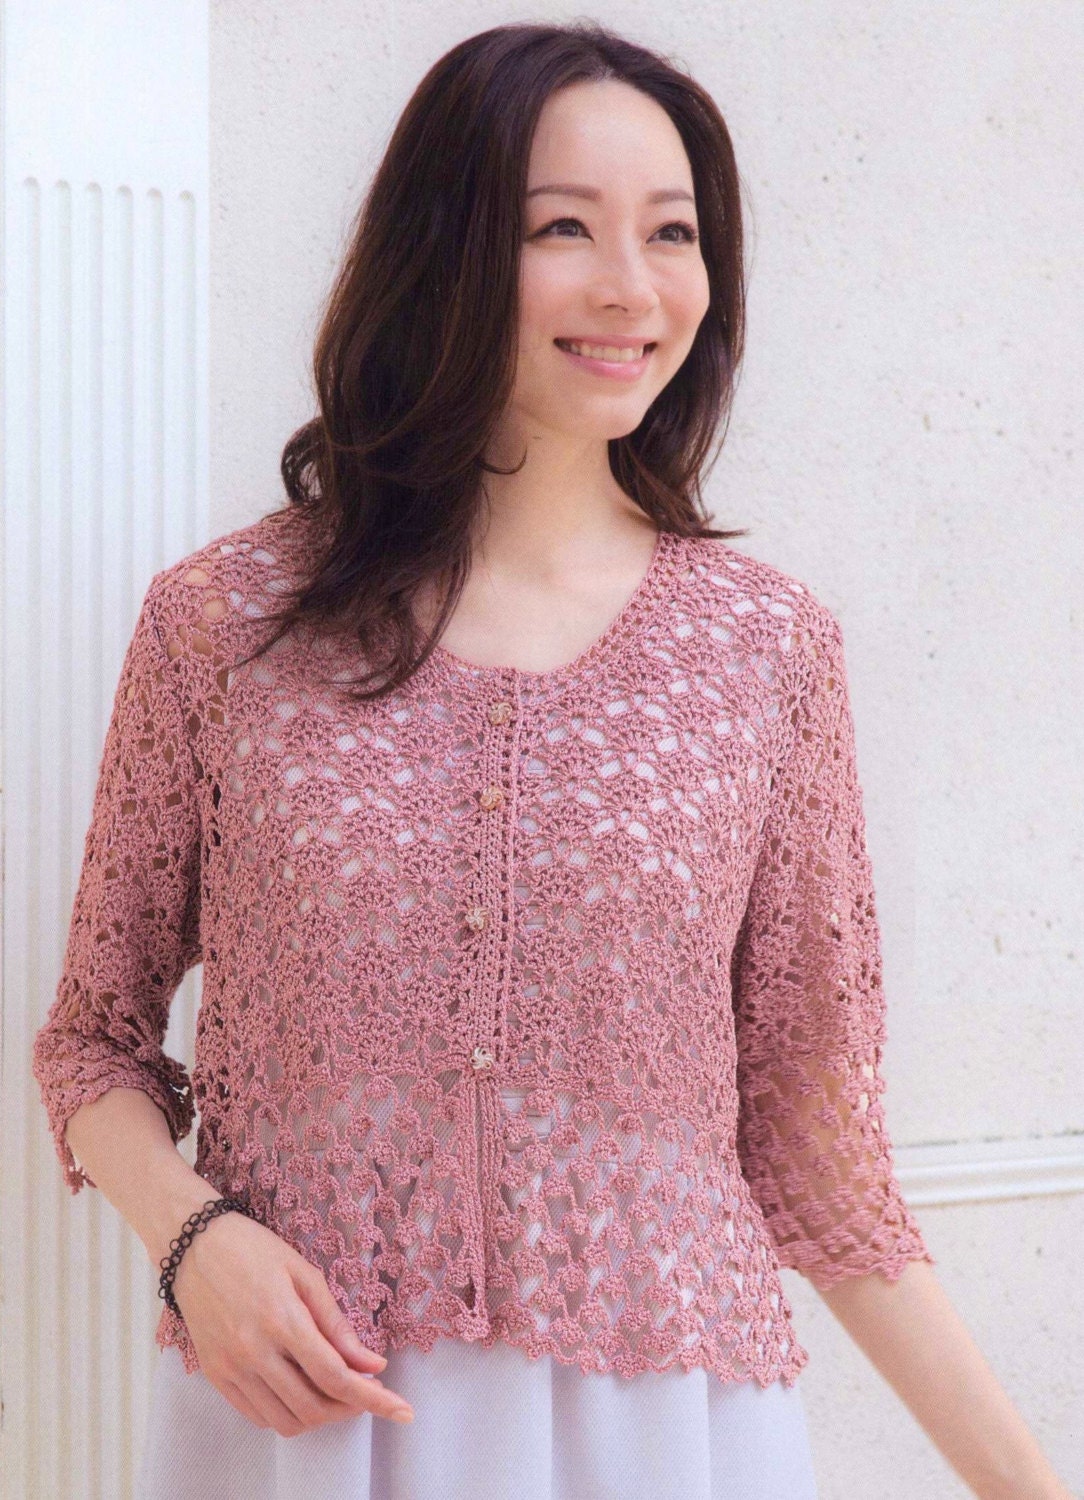 Lady's Crochet Pattern PDF for Lacy Cardigan with Subtle | Etsy